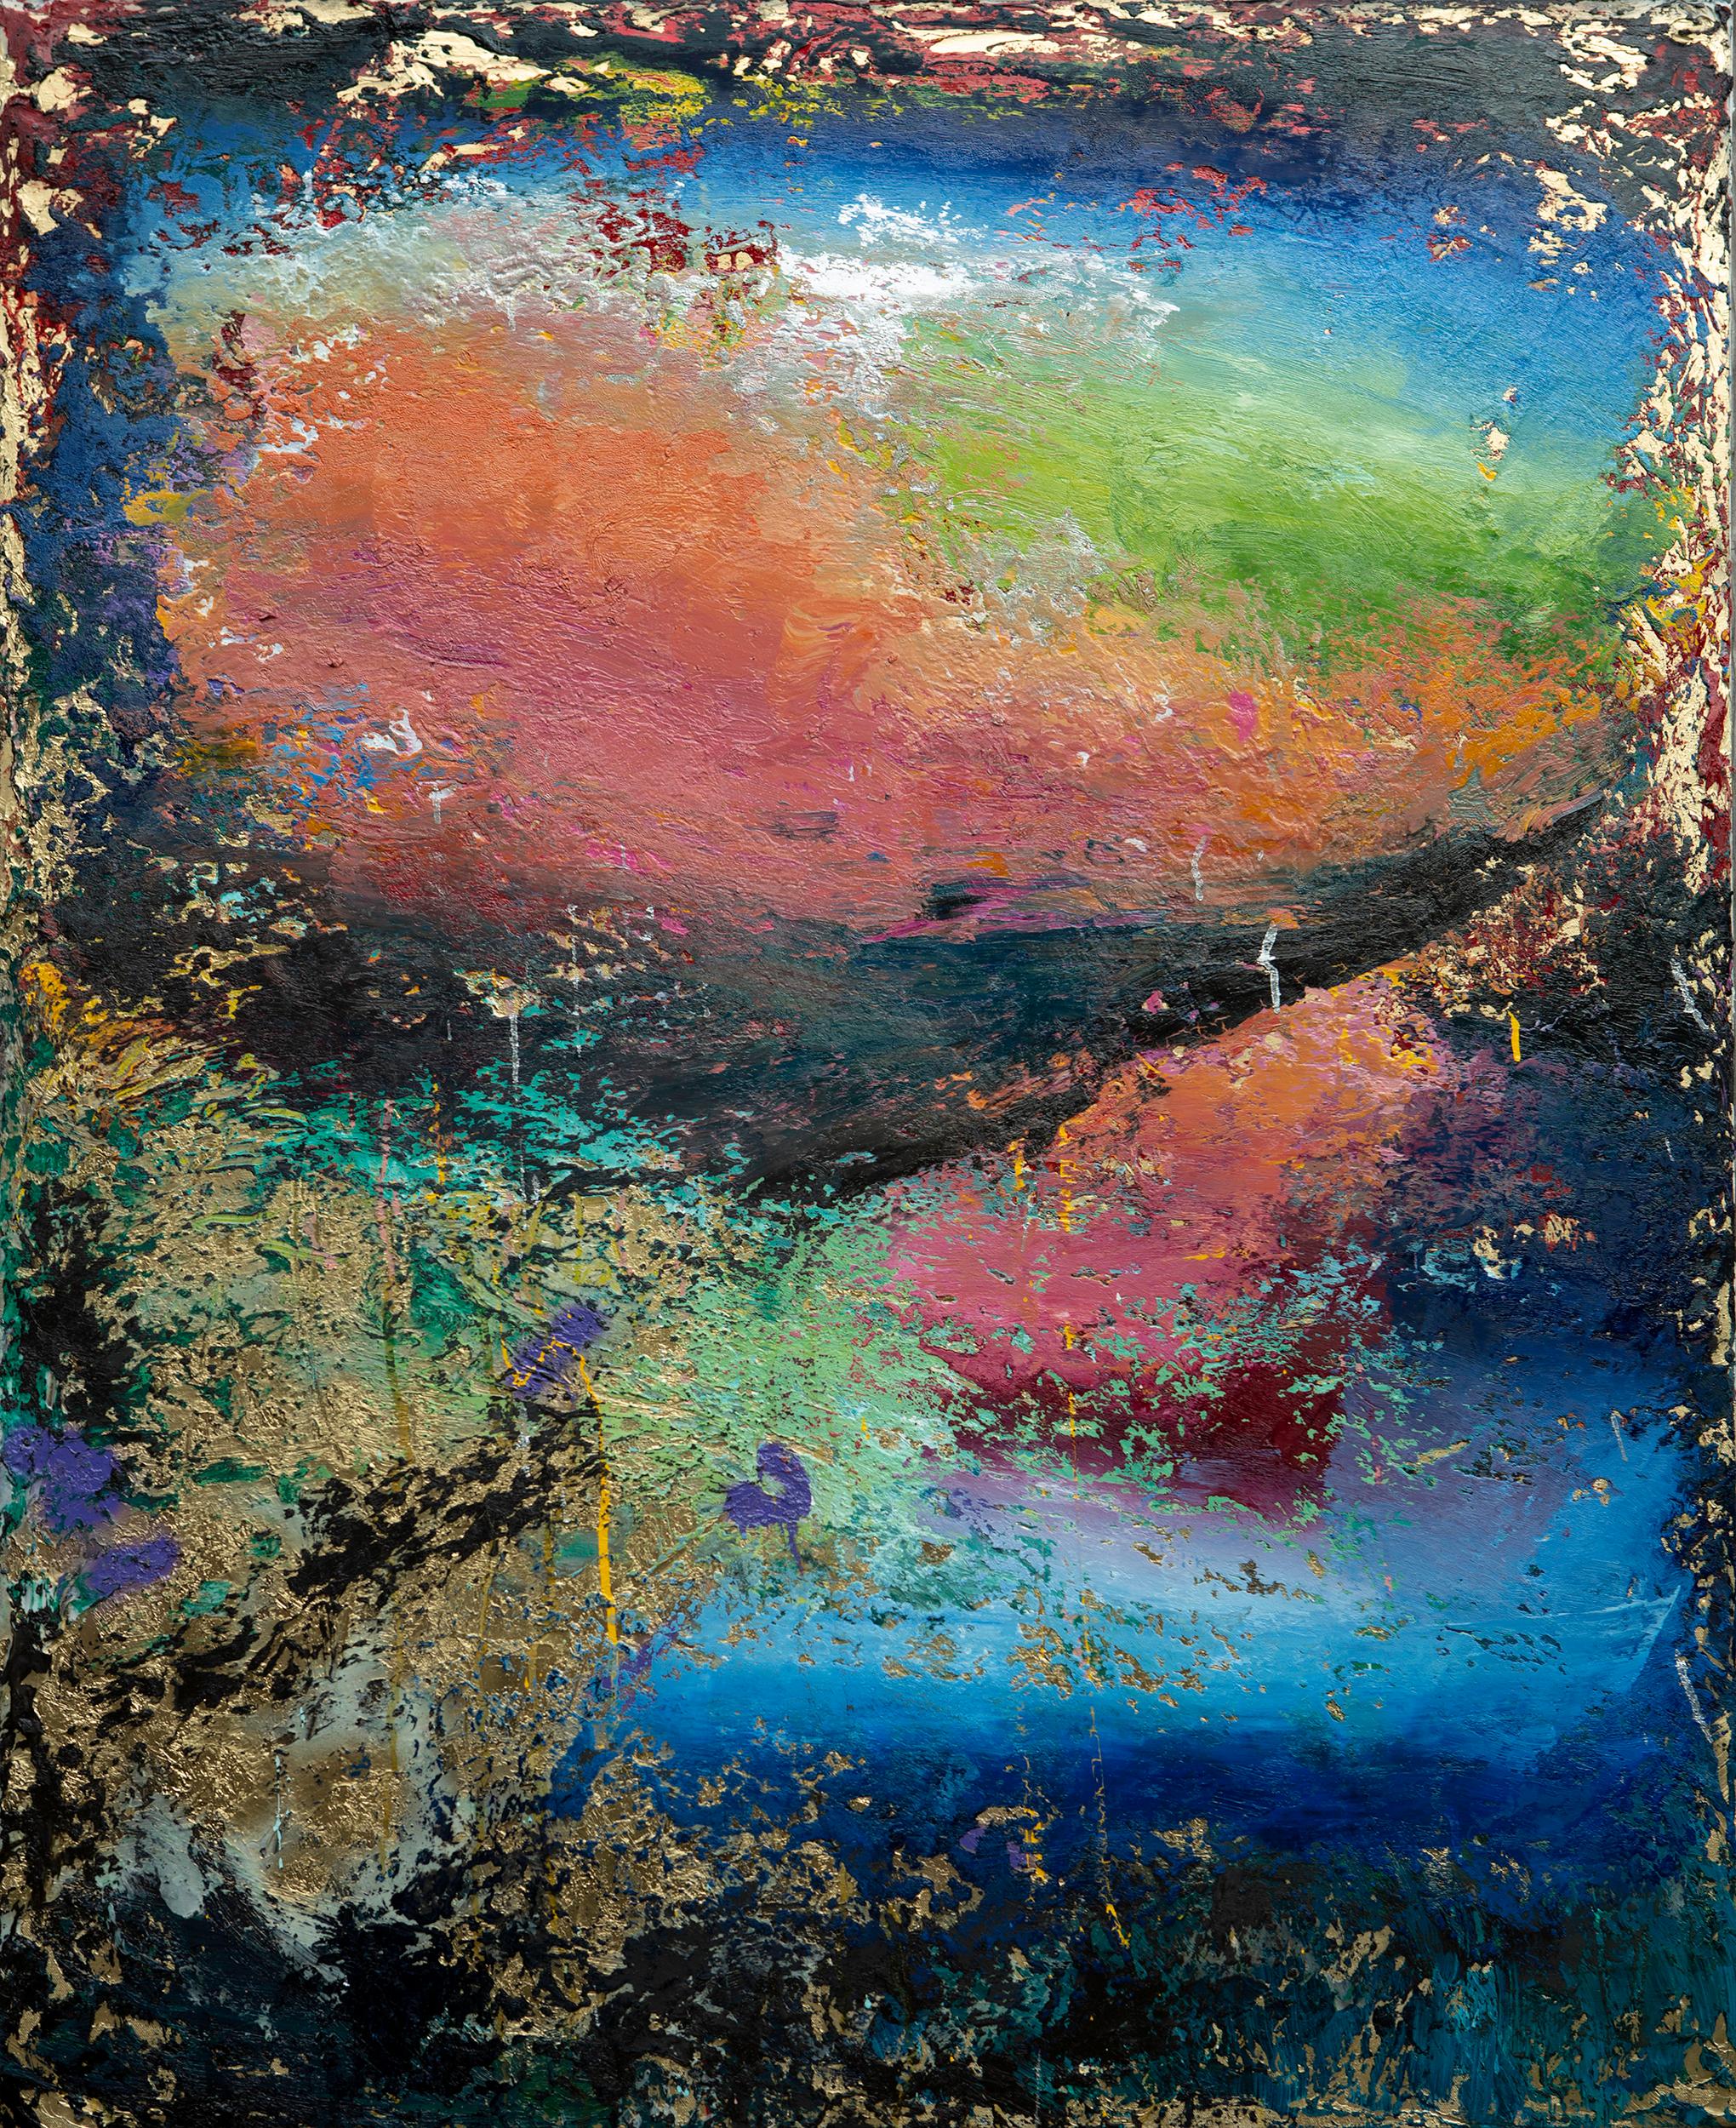 As the Sky Opened Up, Abstract Painting - Mixed Media Art by Scott Dykema